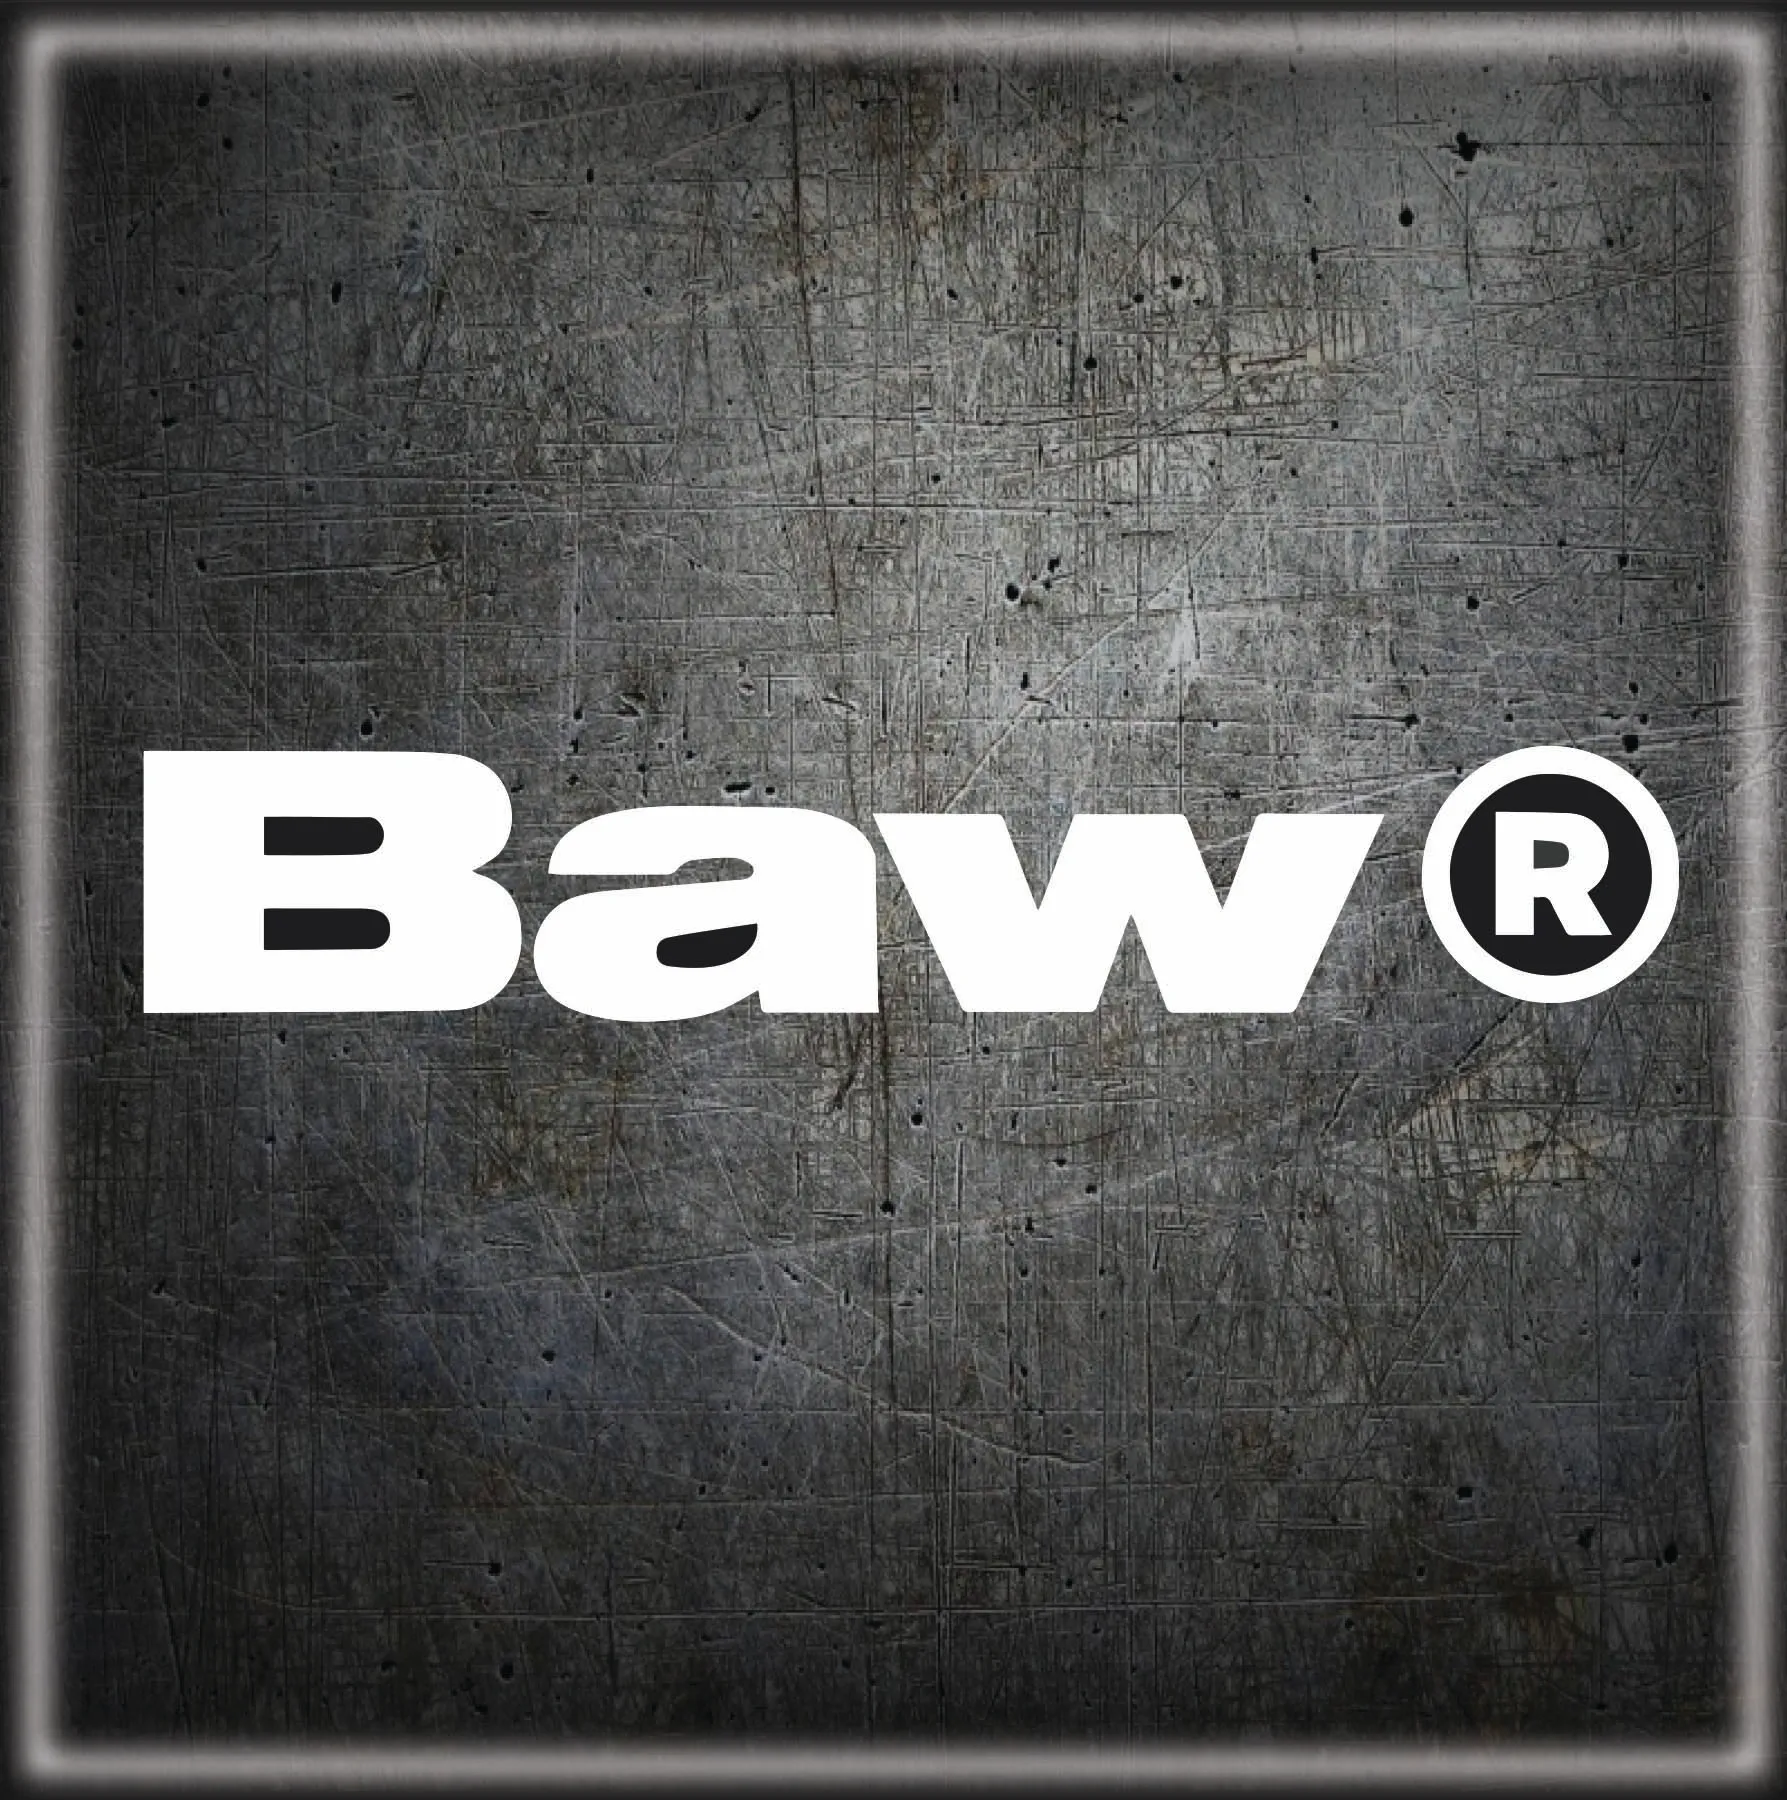 A picture of the word baw on a wall.